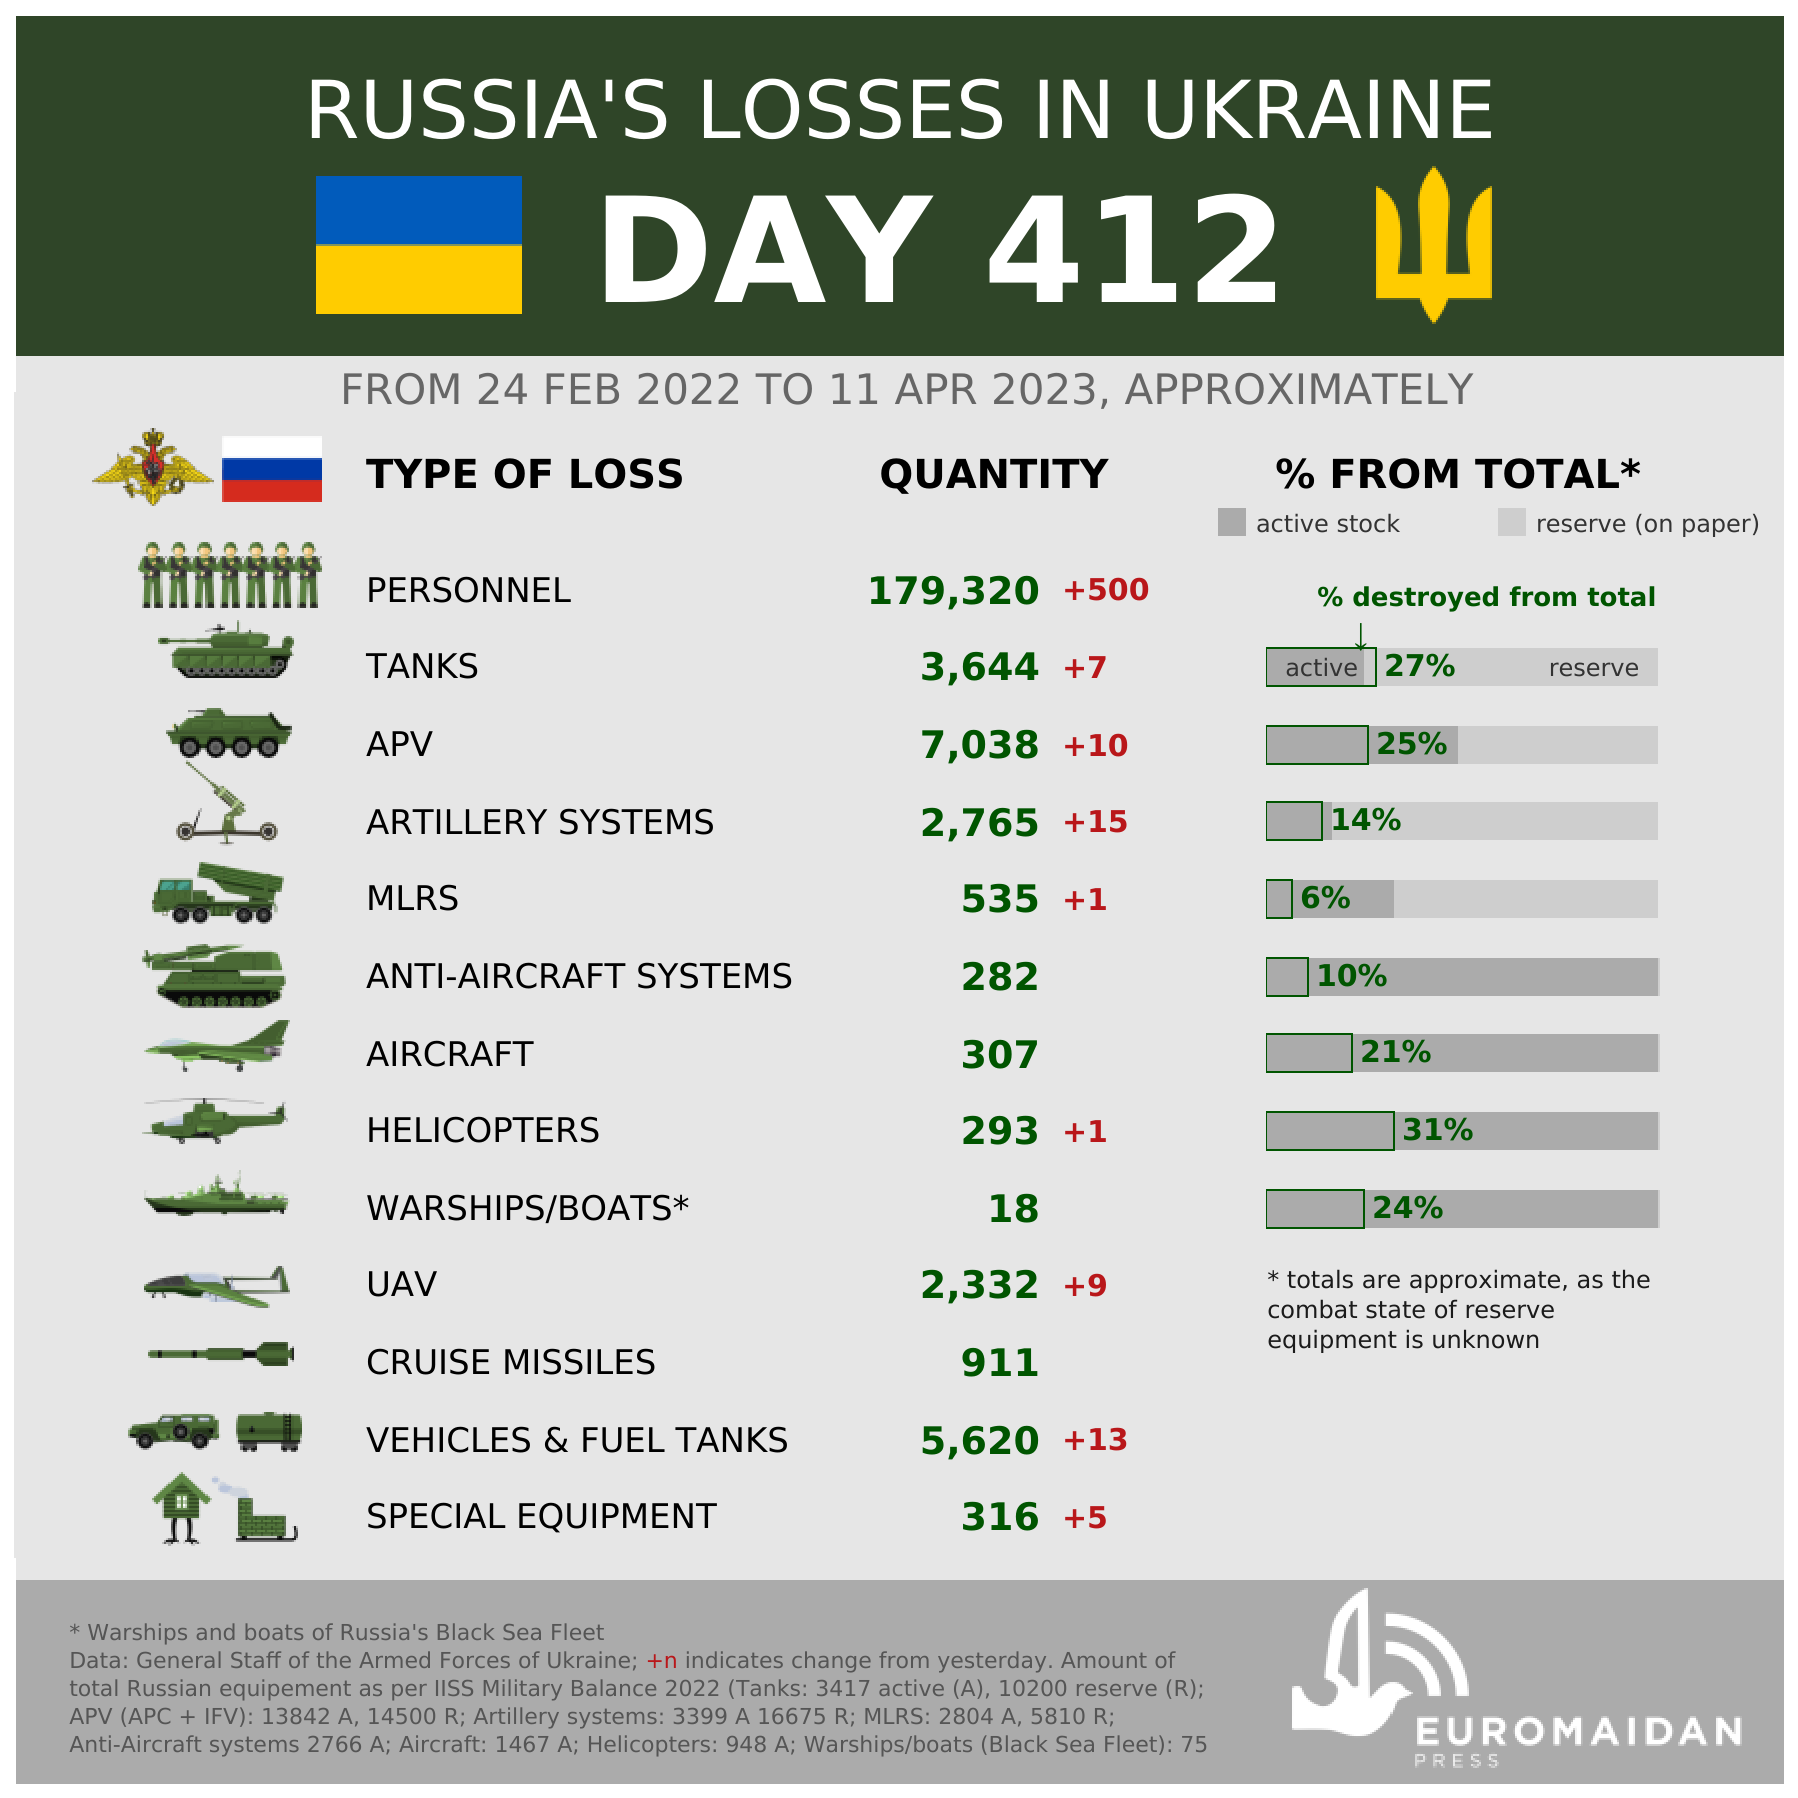 Russia loses 500 personnel, 7 tanks, 10 APVs, 15 artillery systems, and more within previous day